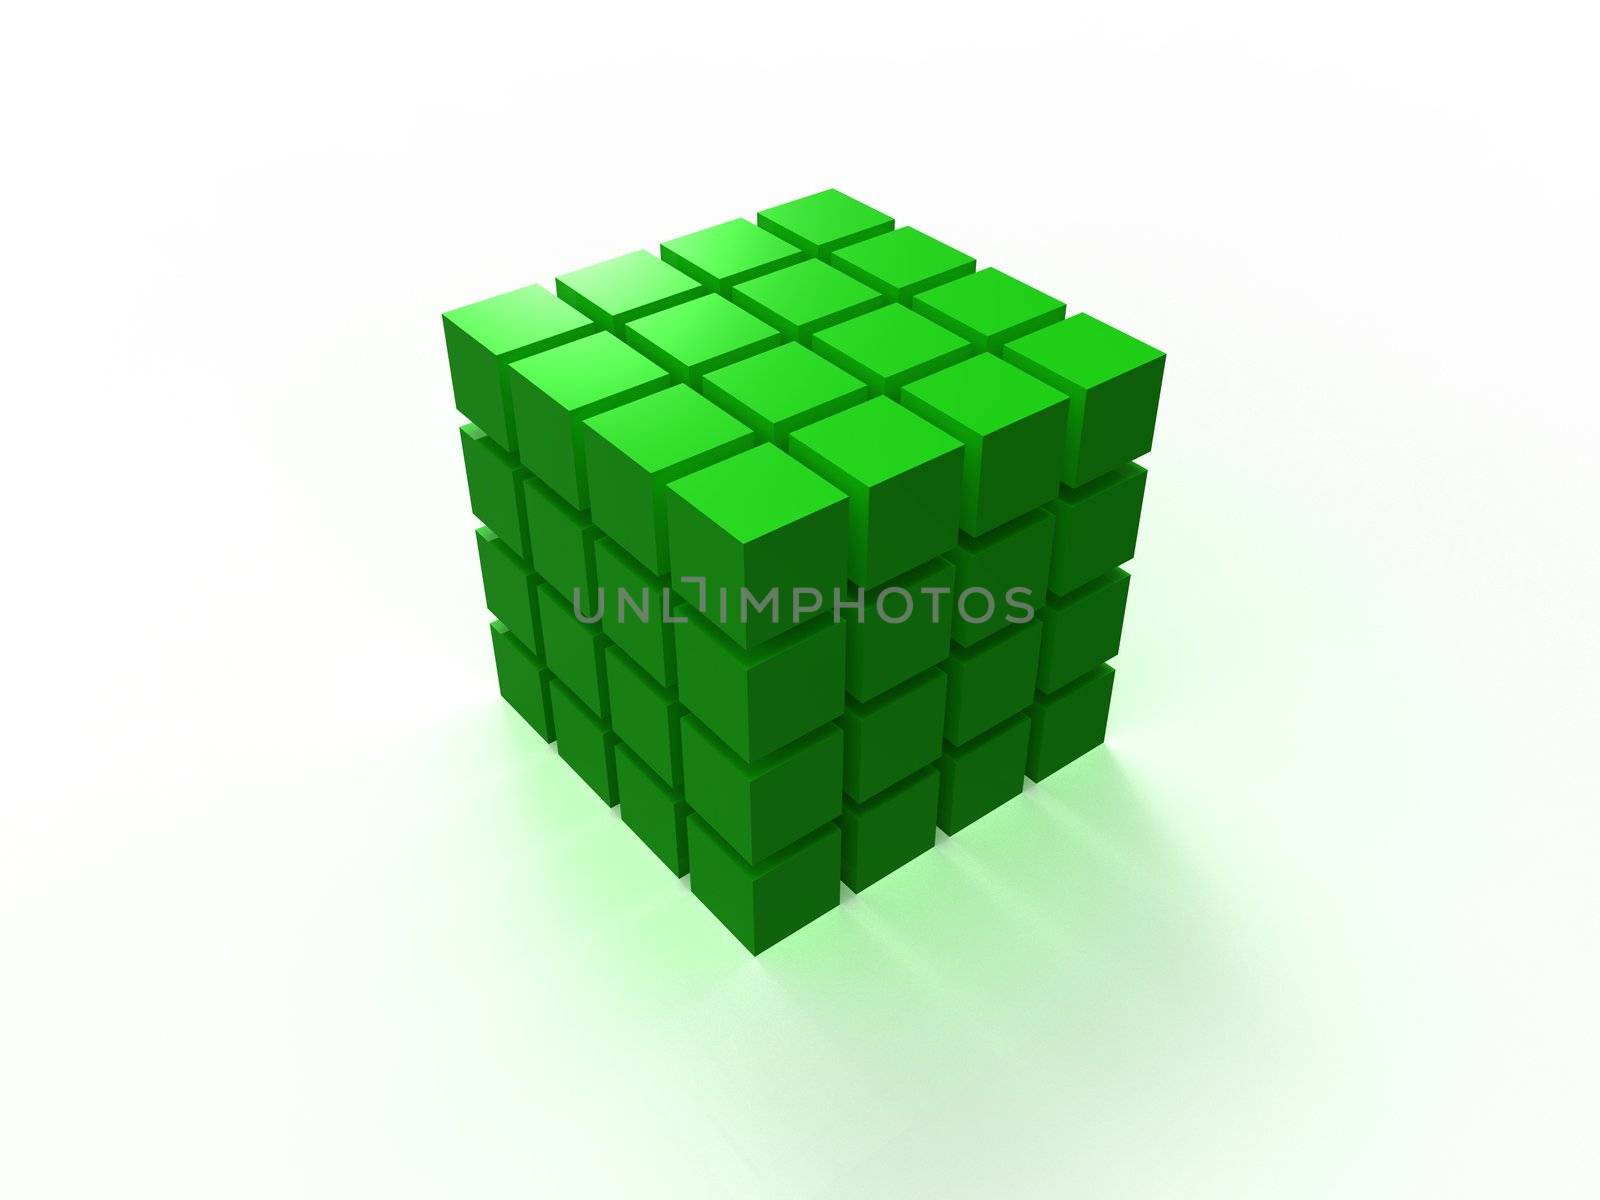 4x4 green ordered cube assembling from blocks isolated on white background